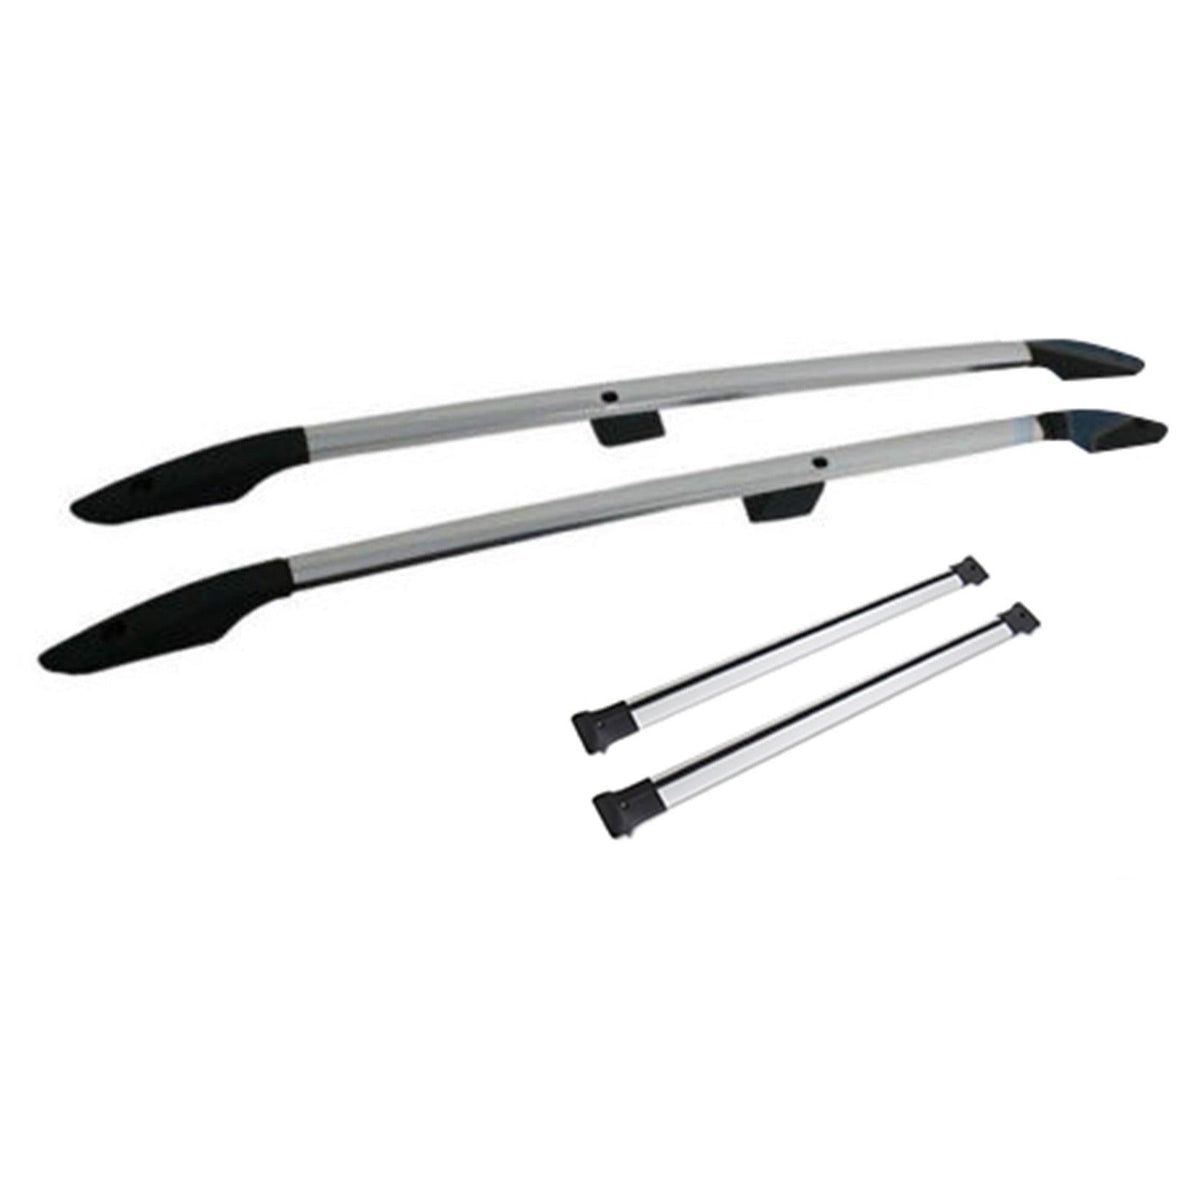 VW TRANSPORTER T5 - T6 - SWB ROOF RAILS AND CROSS BARS SET - SILVER - Storm Xccessories2